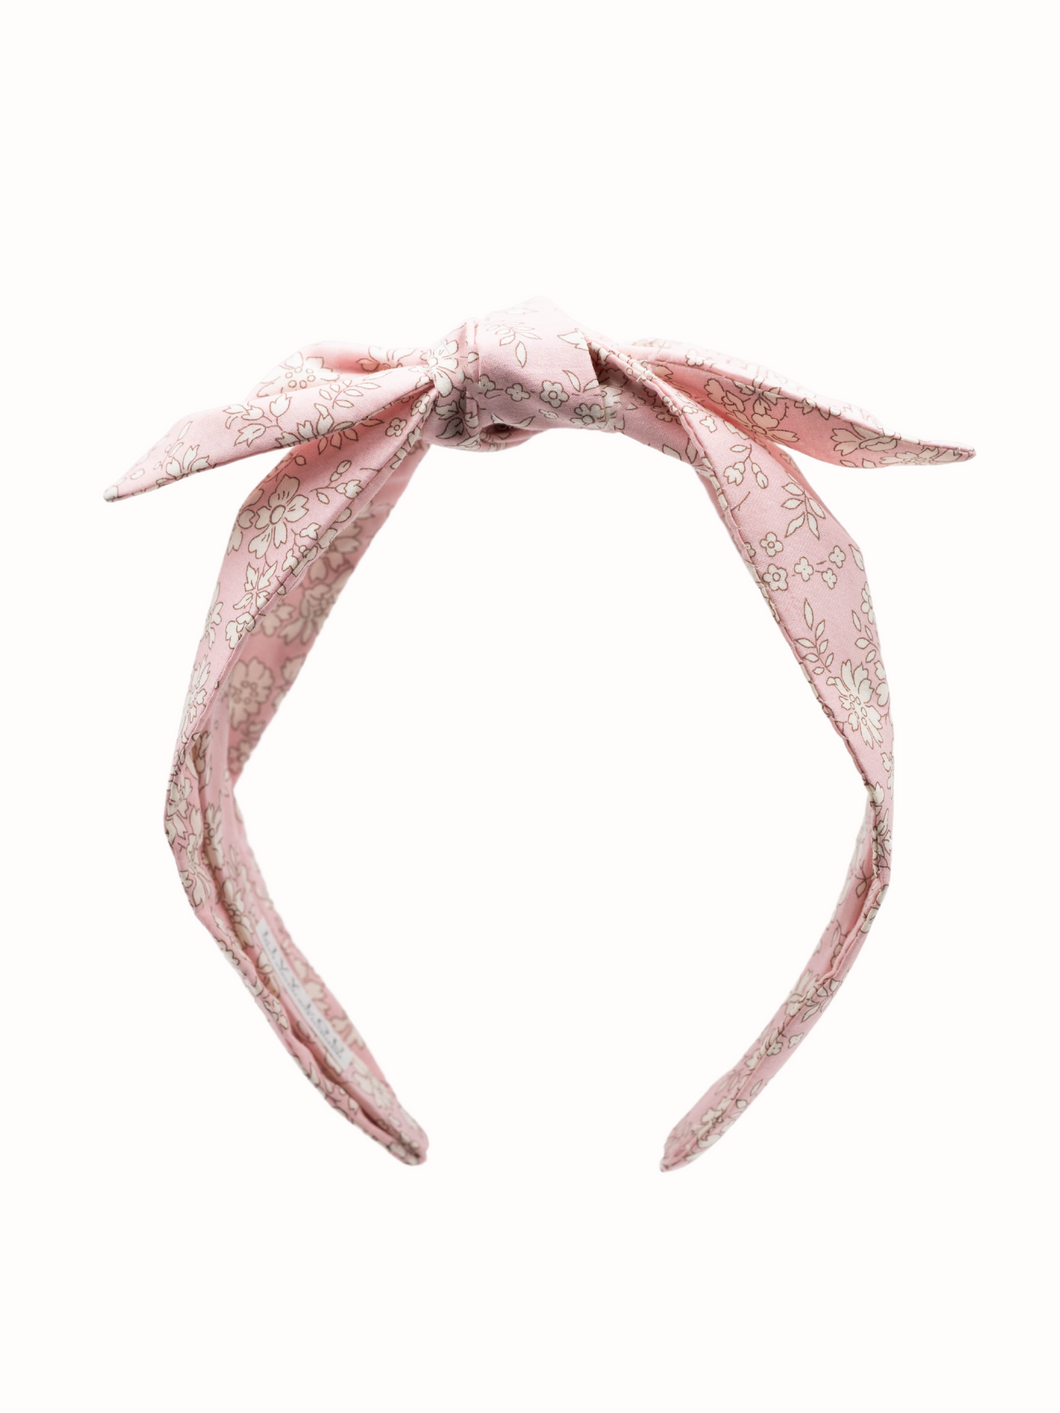 Ava Liberty of London Capel Tana Lawn girls knotted headband / Livy Lou Collection